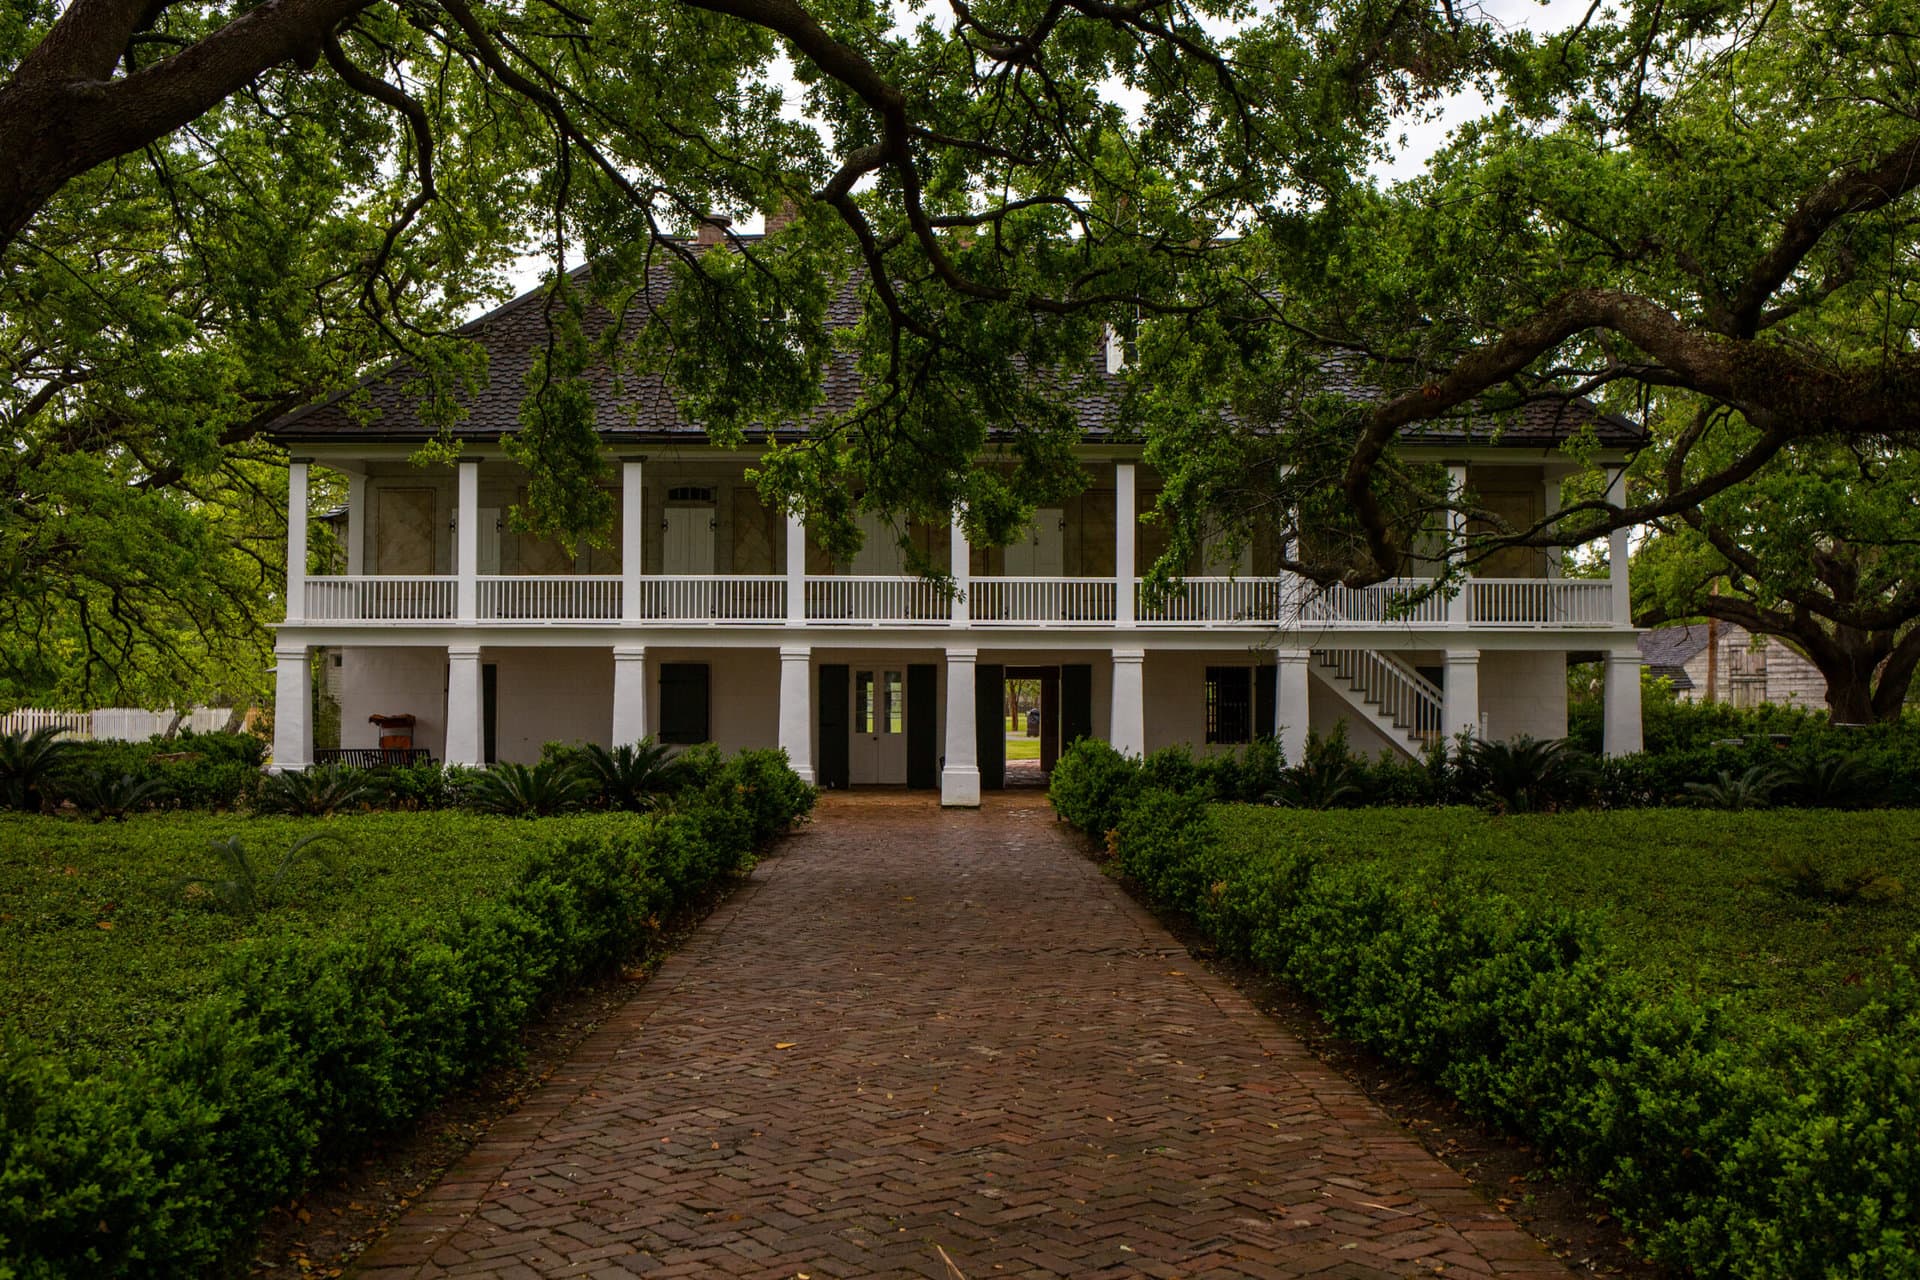 a 3-story white house with a large porch and columns surrounded by trees and a brick path